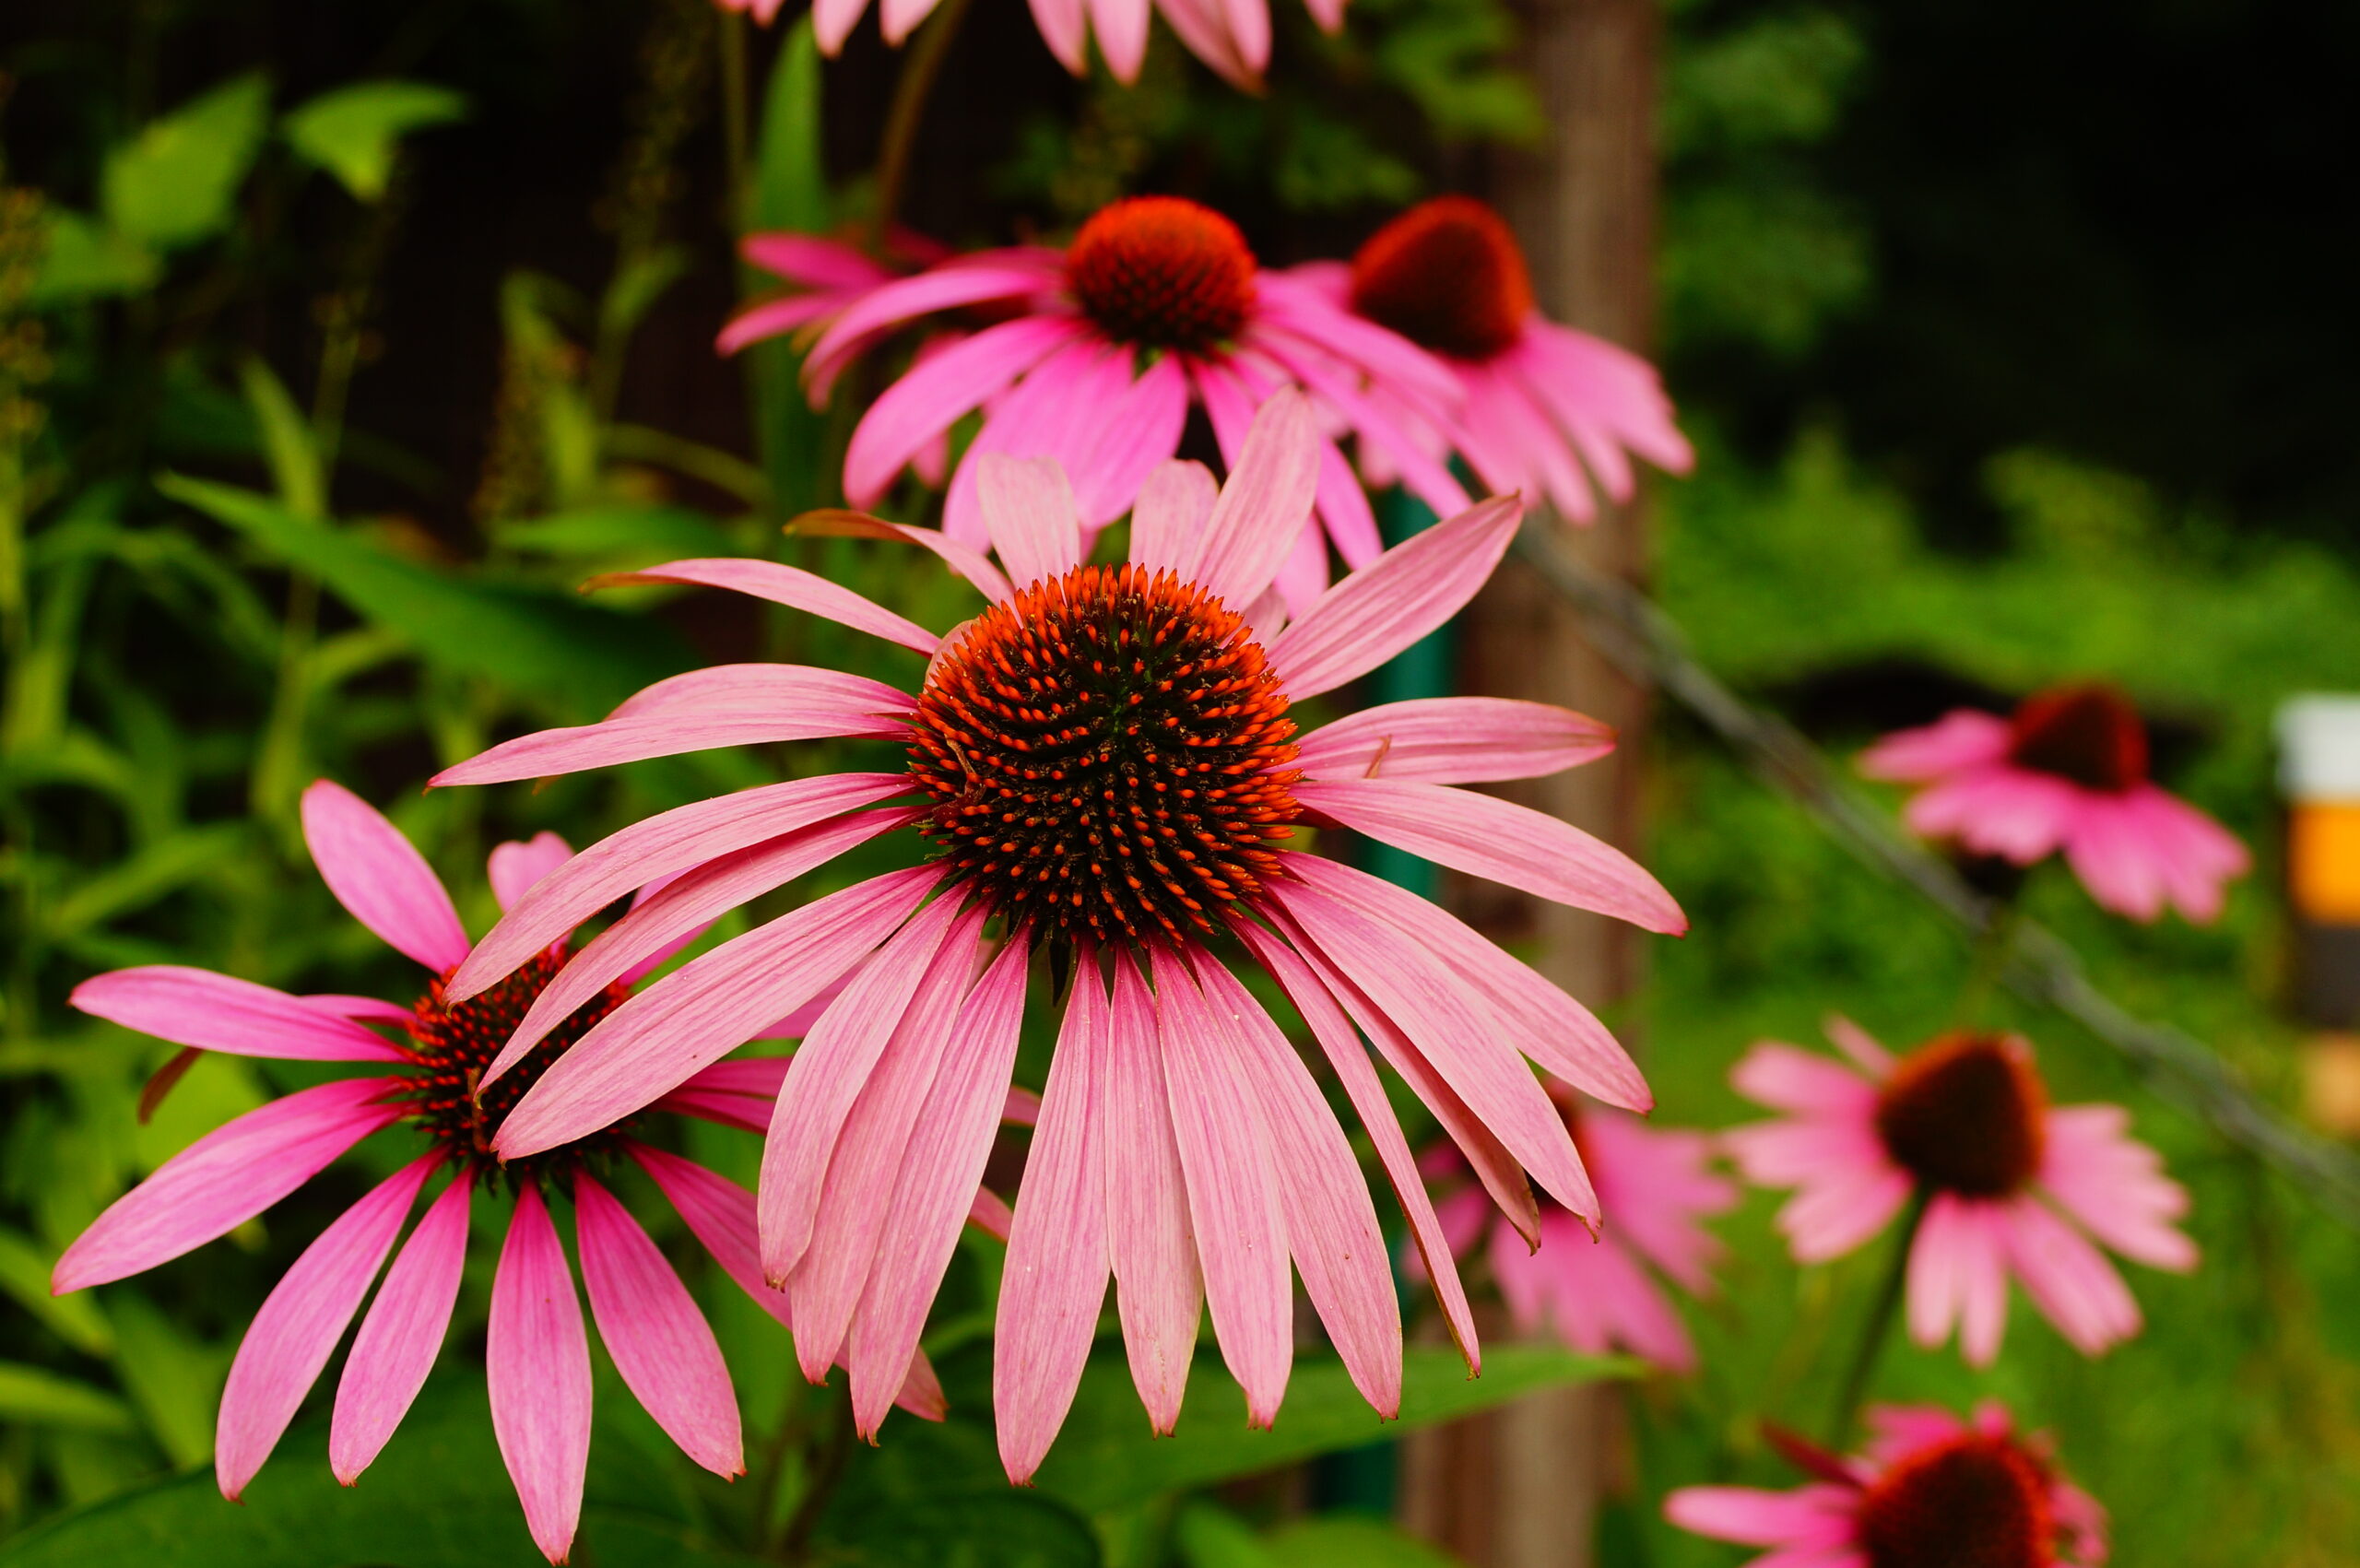 Close-up of the flower of an Echinacea purpurea in the Botanical Garden in Frankfurt. A plant used horticulturally and medicinally